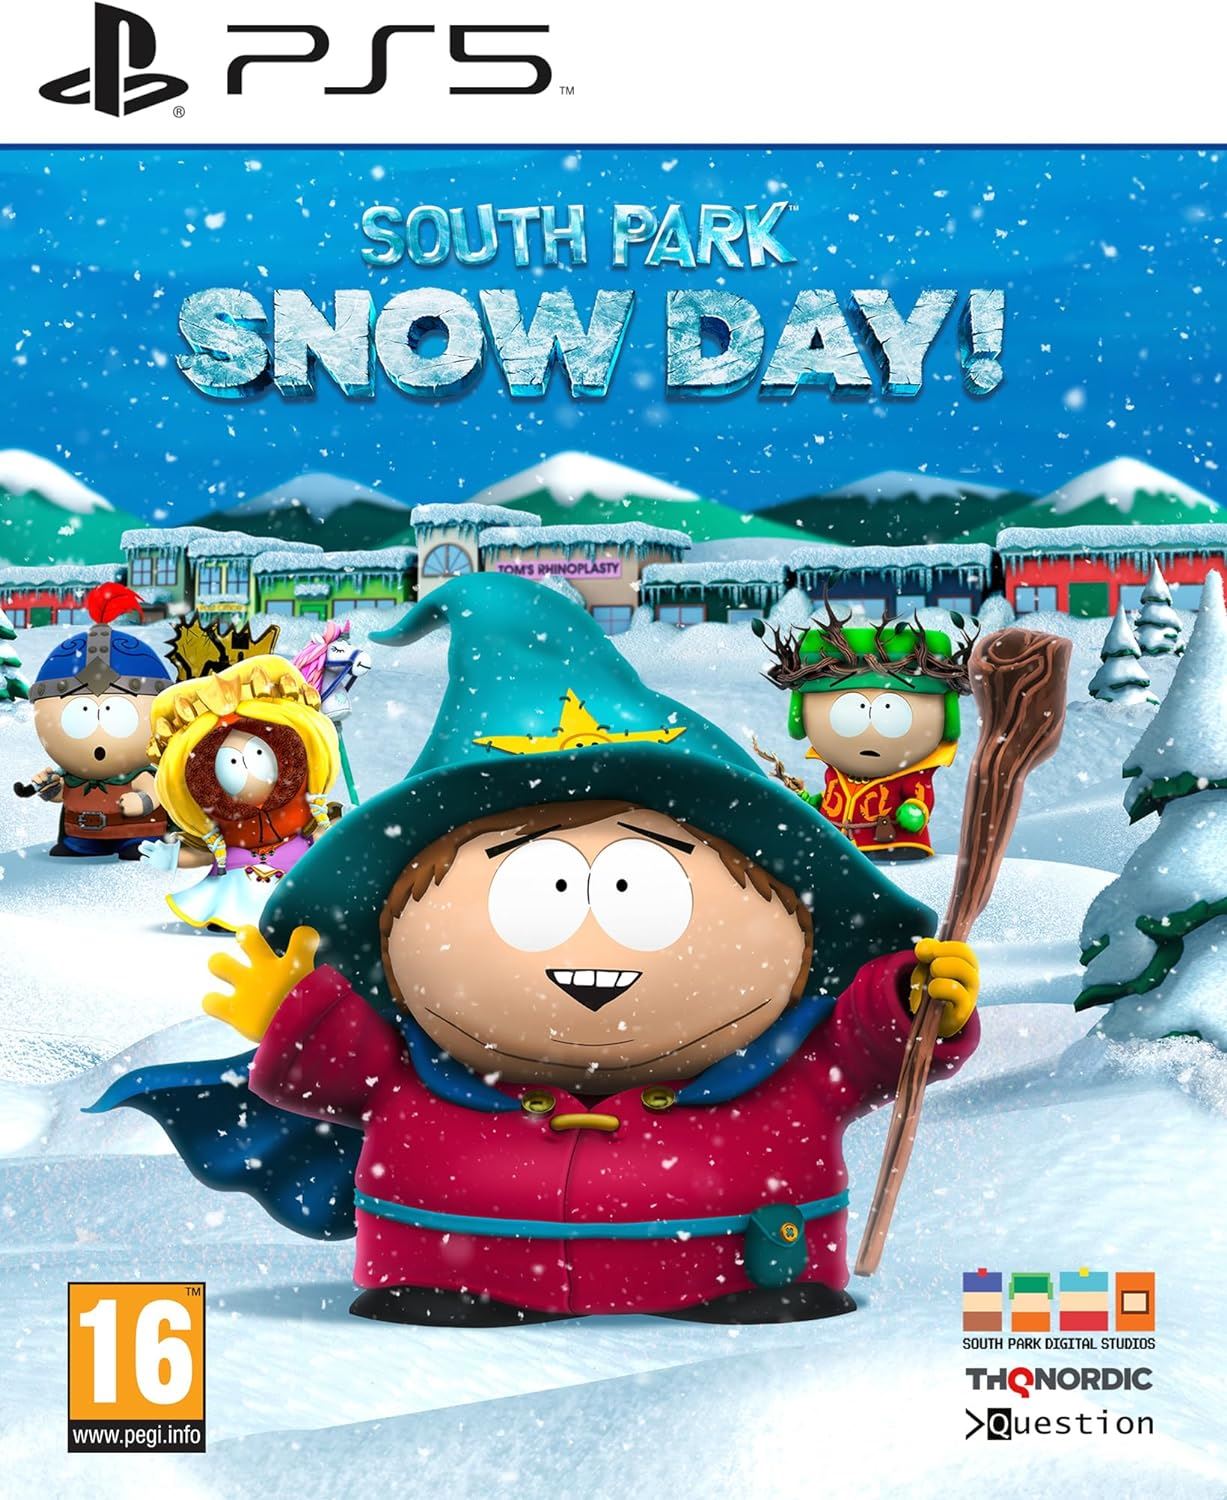 SOUTH PARK - SNOW DAY! PS5